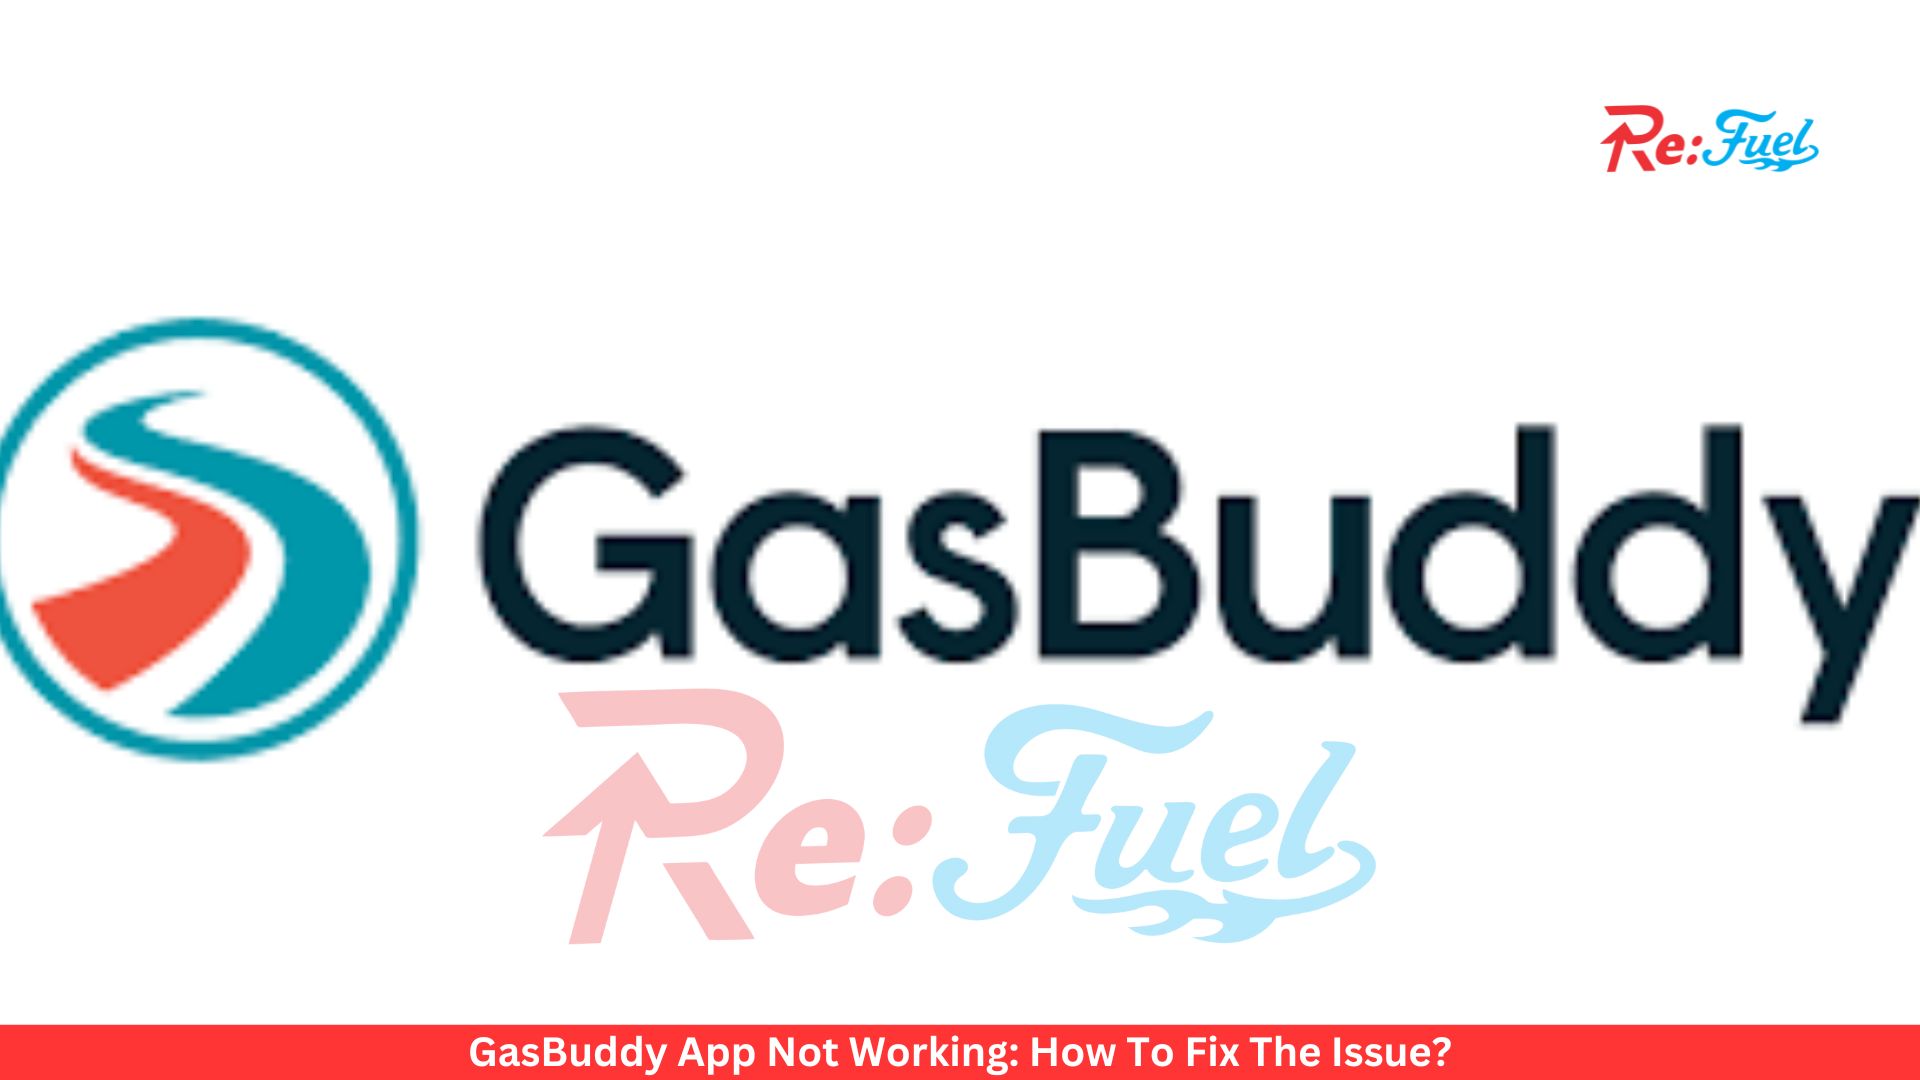 GasBuddy App Not Working: How To Fix The Issue?